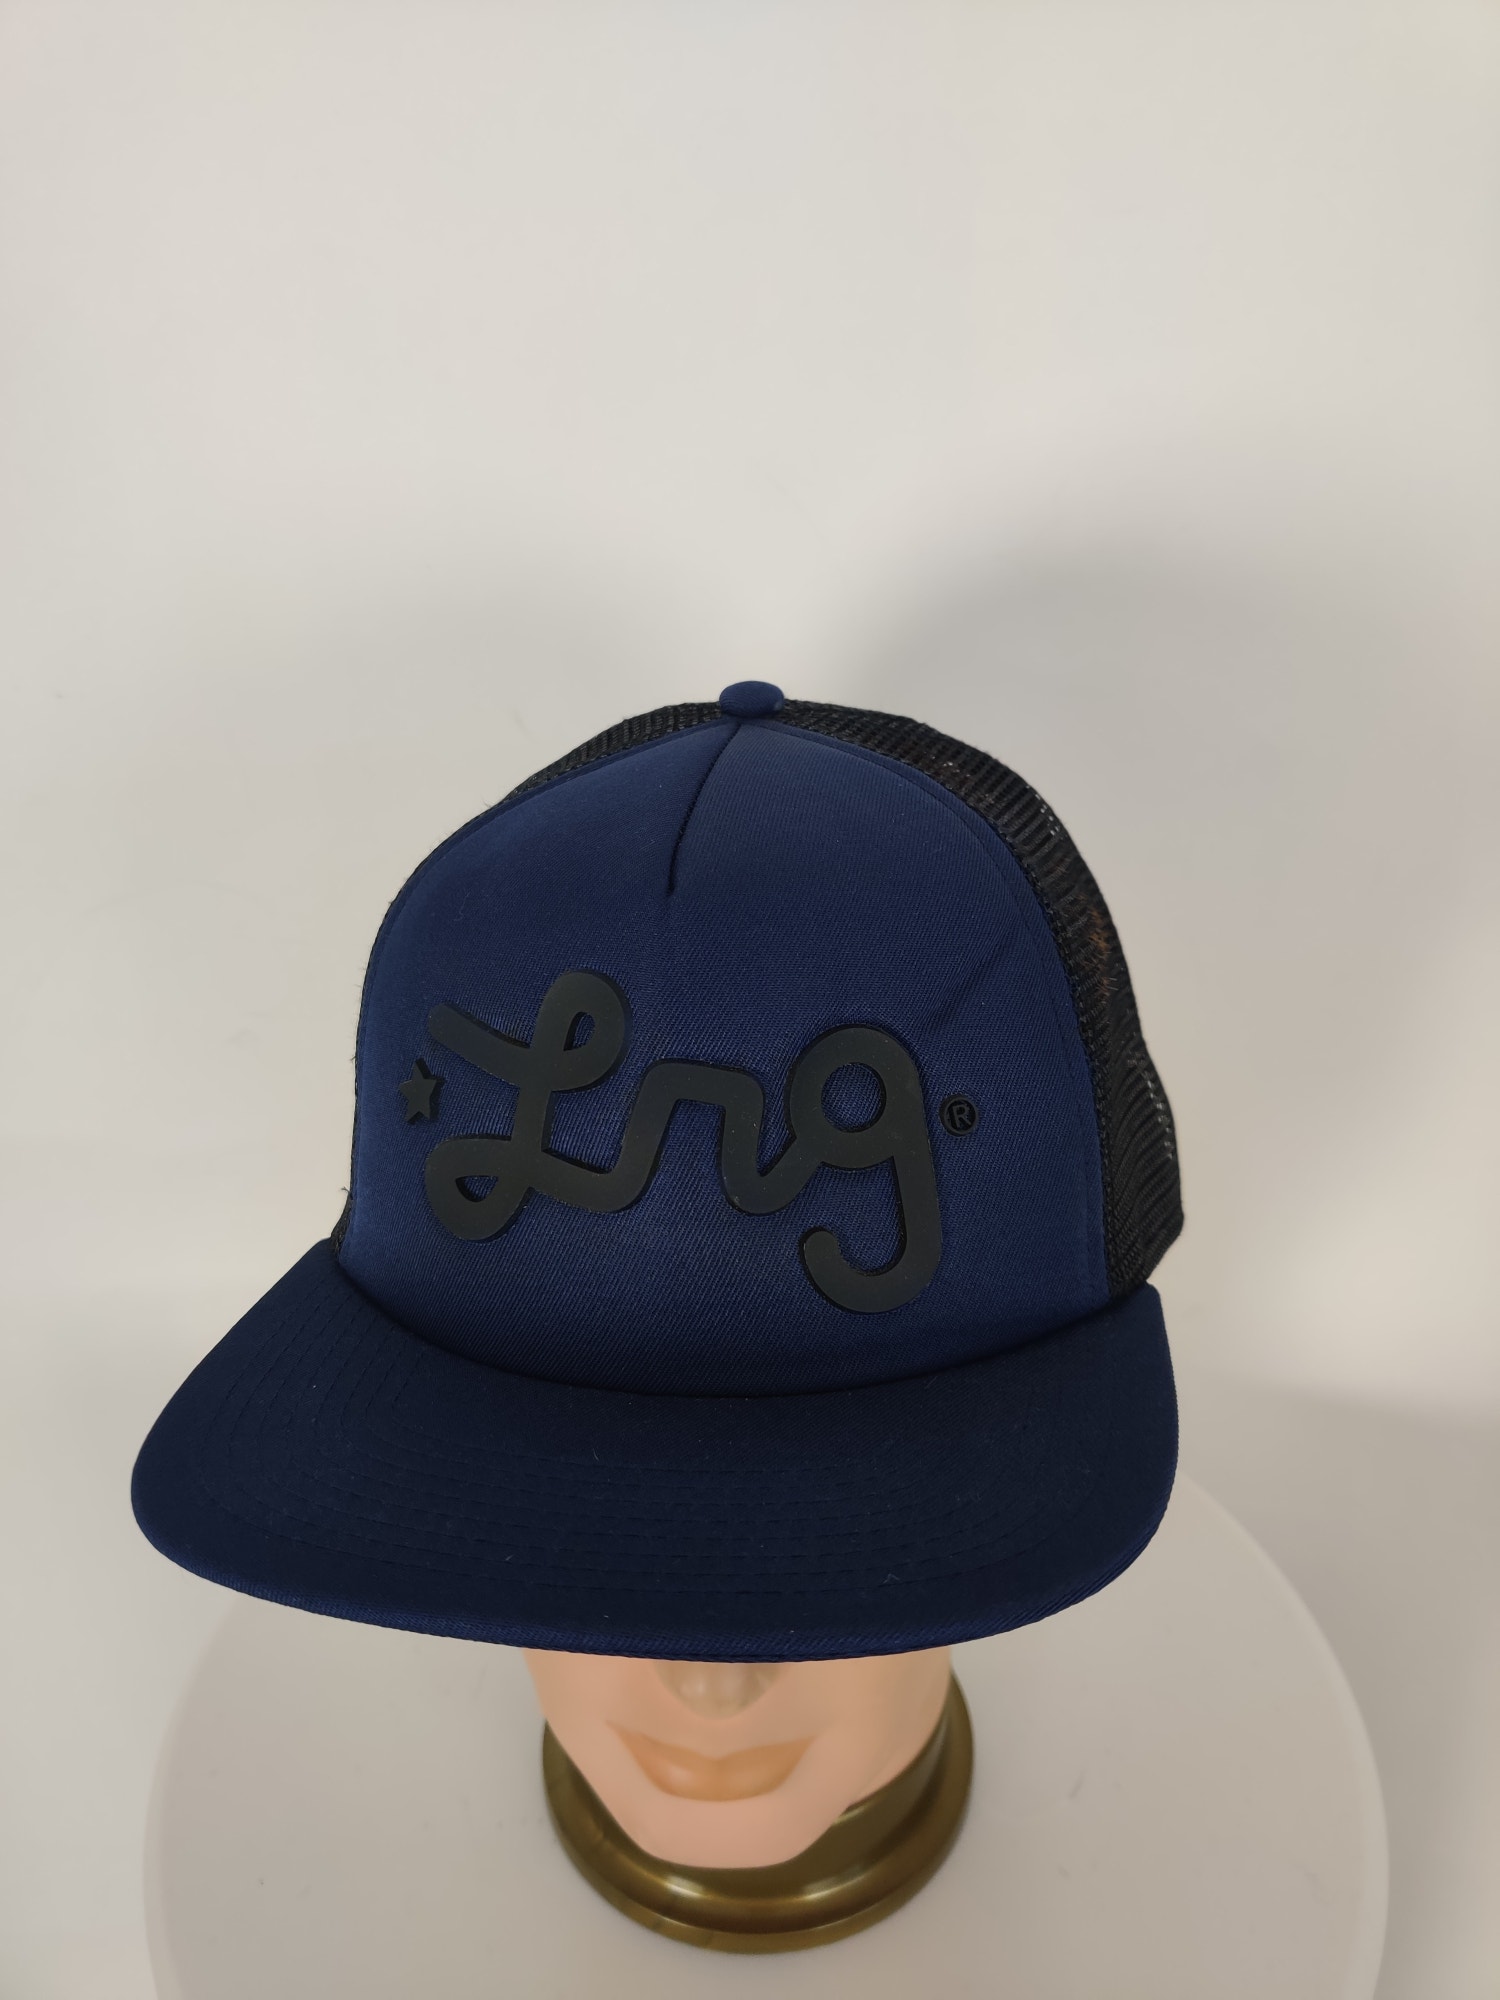 (V) ORIGINAL LRG Unisex hat hiking casual mesh back navy One size  - Picture 6 of 11